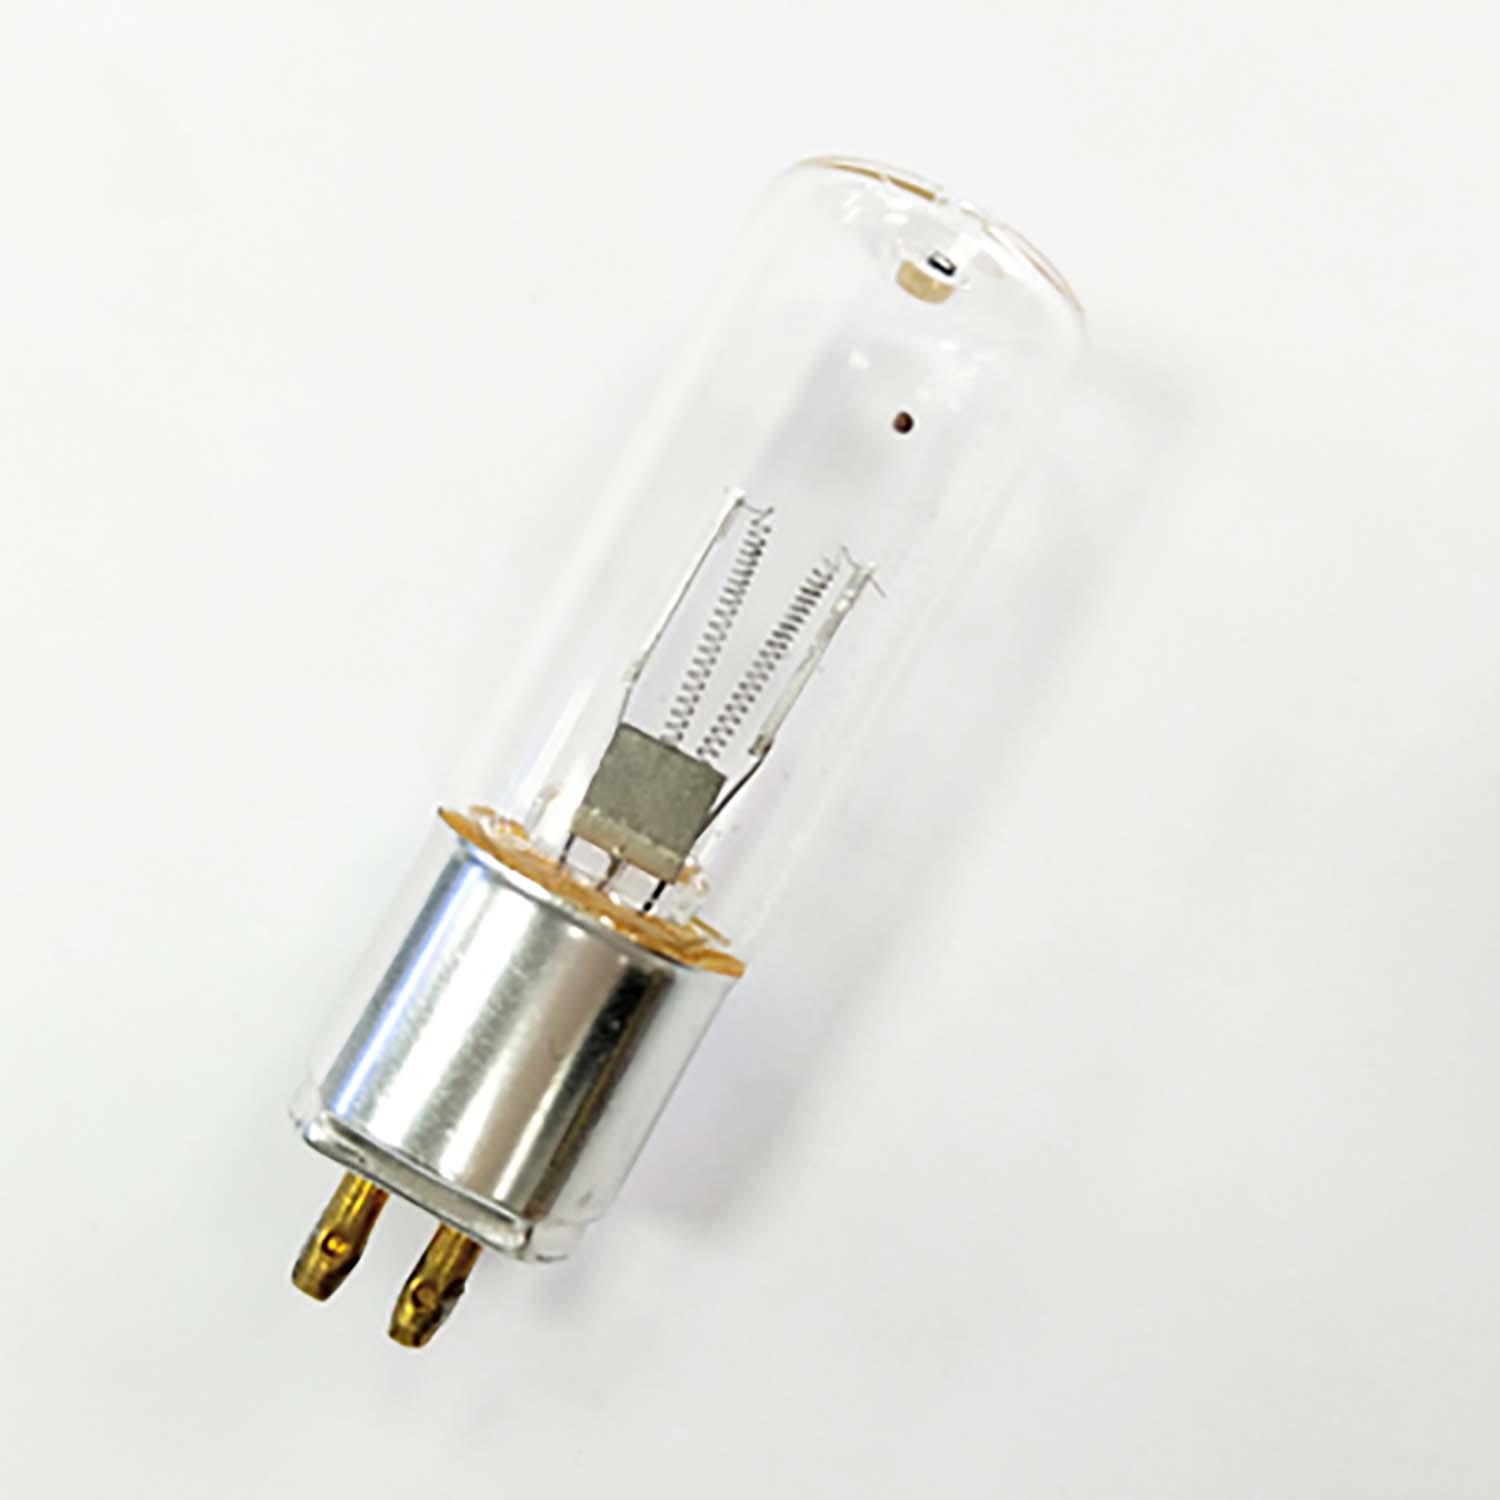 LiangYueLiang ultraviolet uvc germicidal lamp chinese manufacturer for air sterilization-1